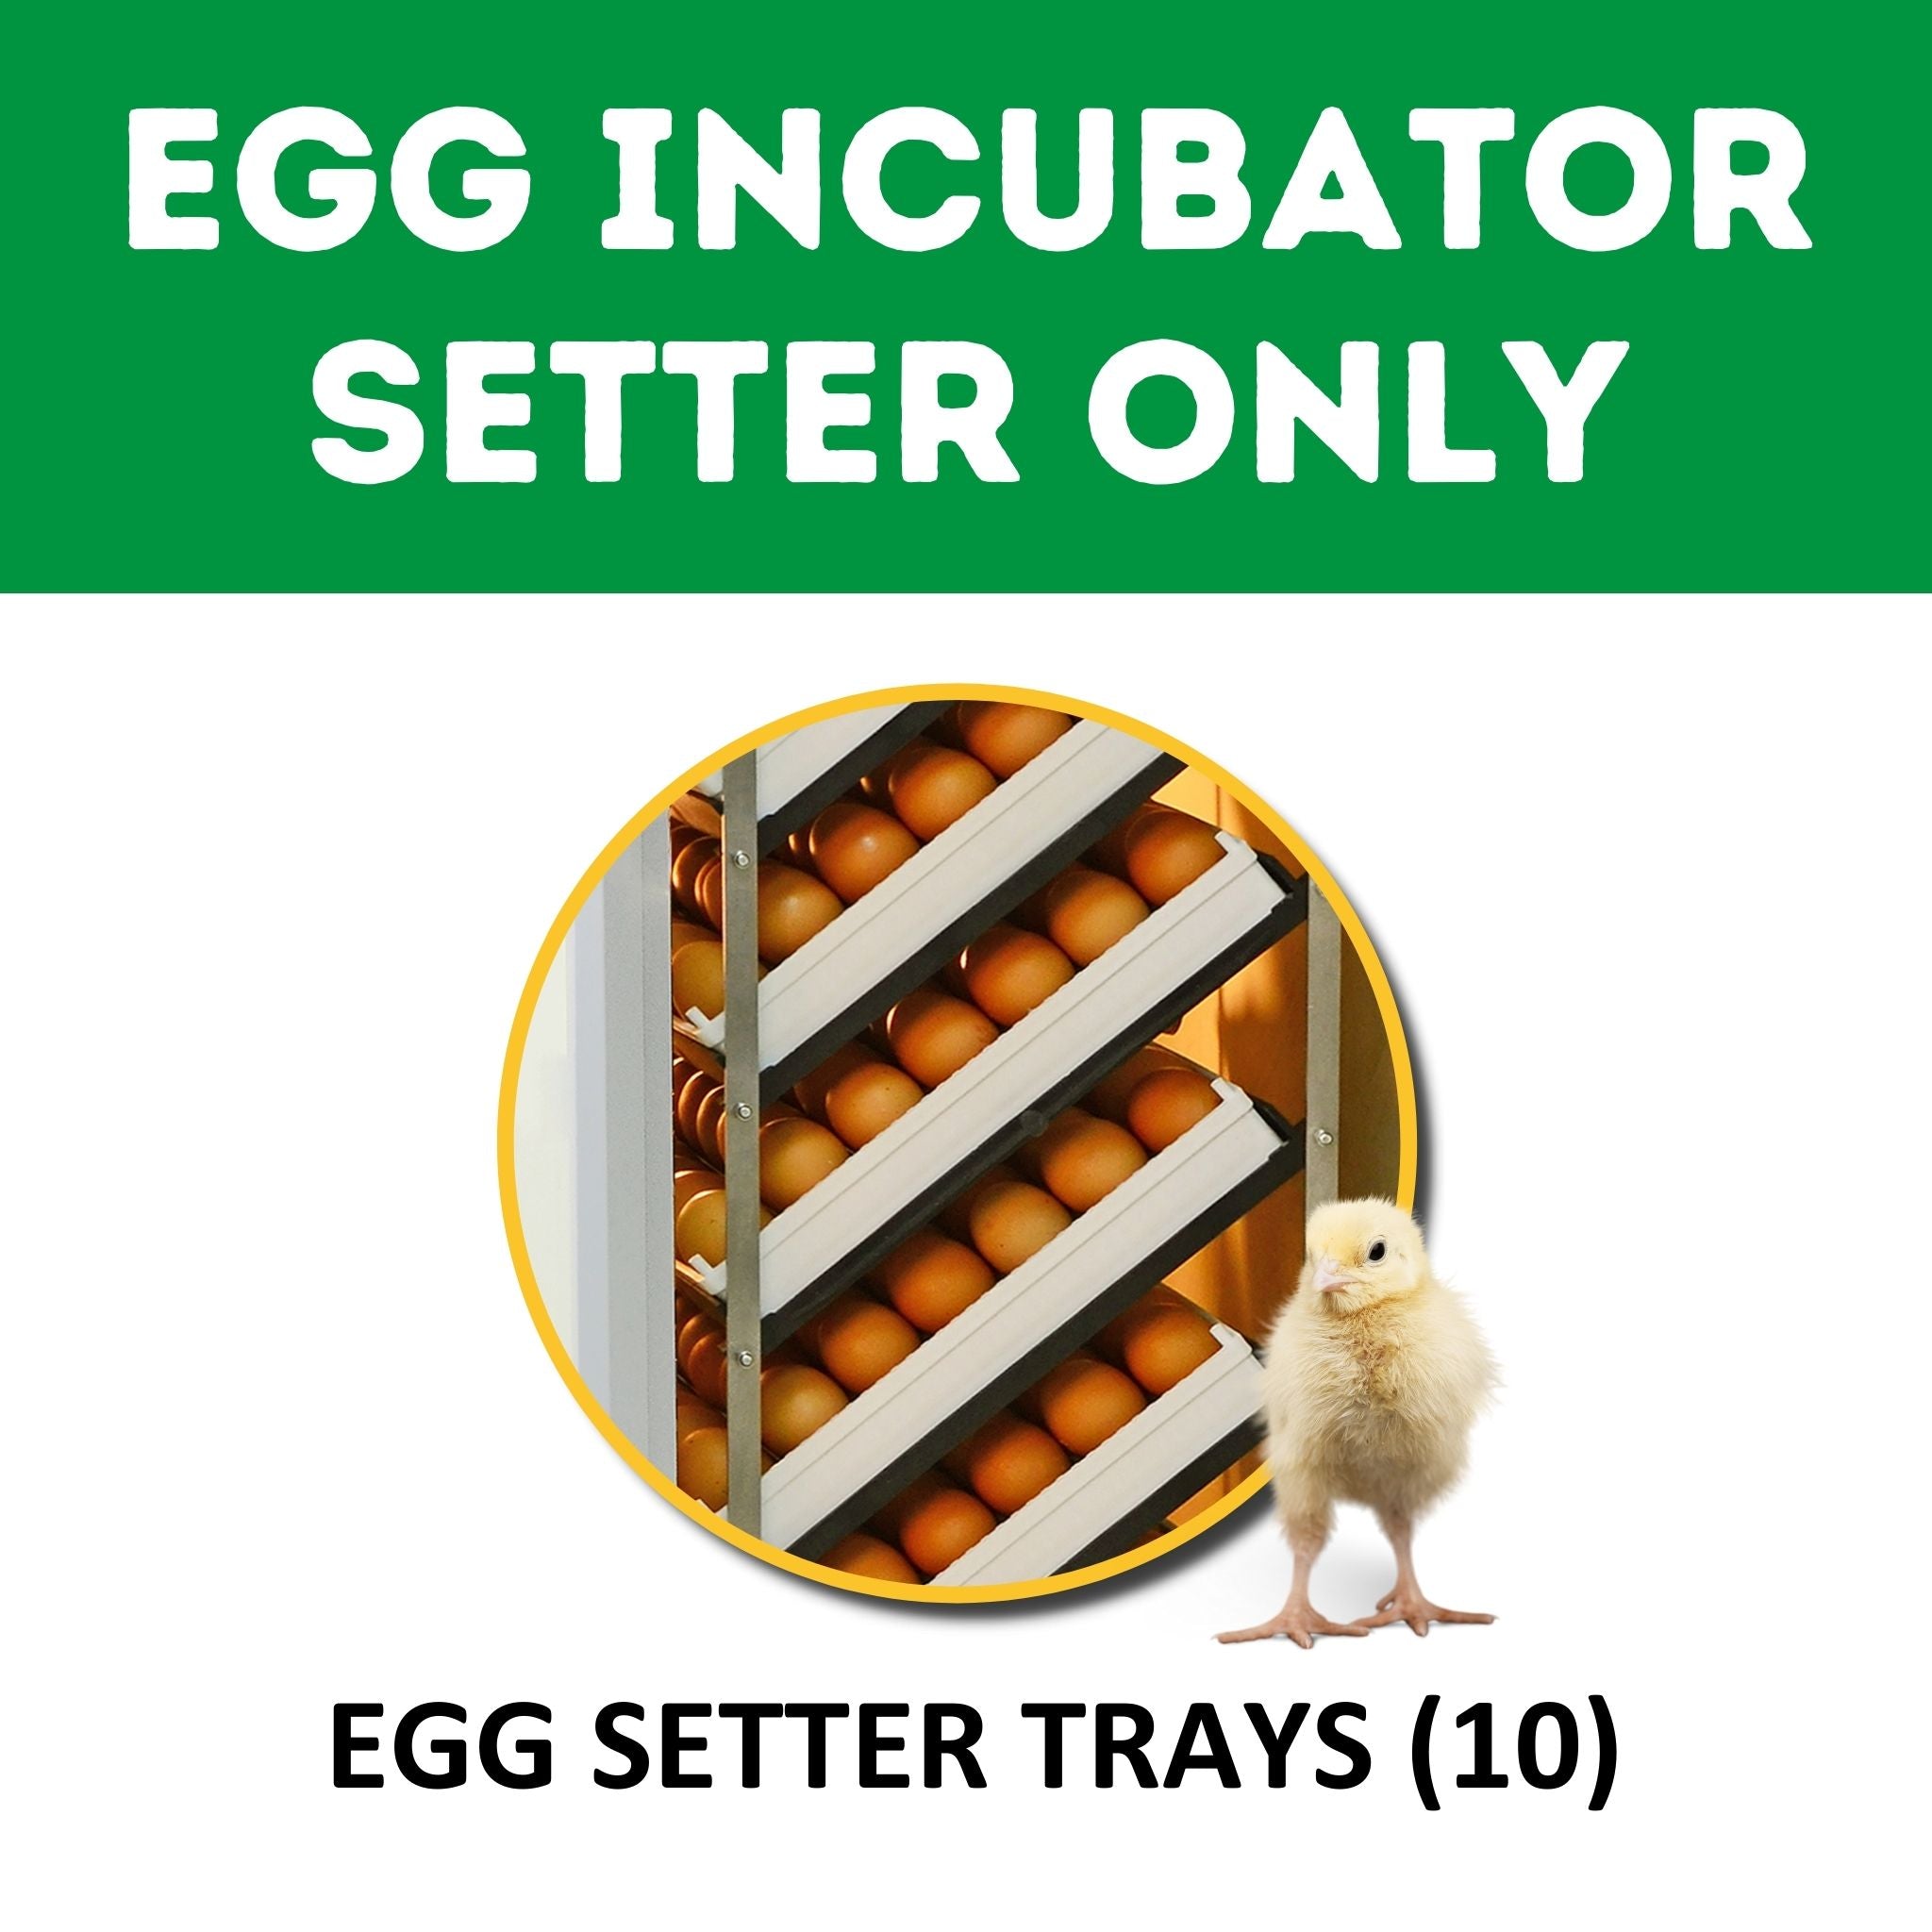 Hatching Time Cimuka. Image shows that incubator is setter only. Includes 10 setter trays , seen in image.